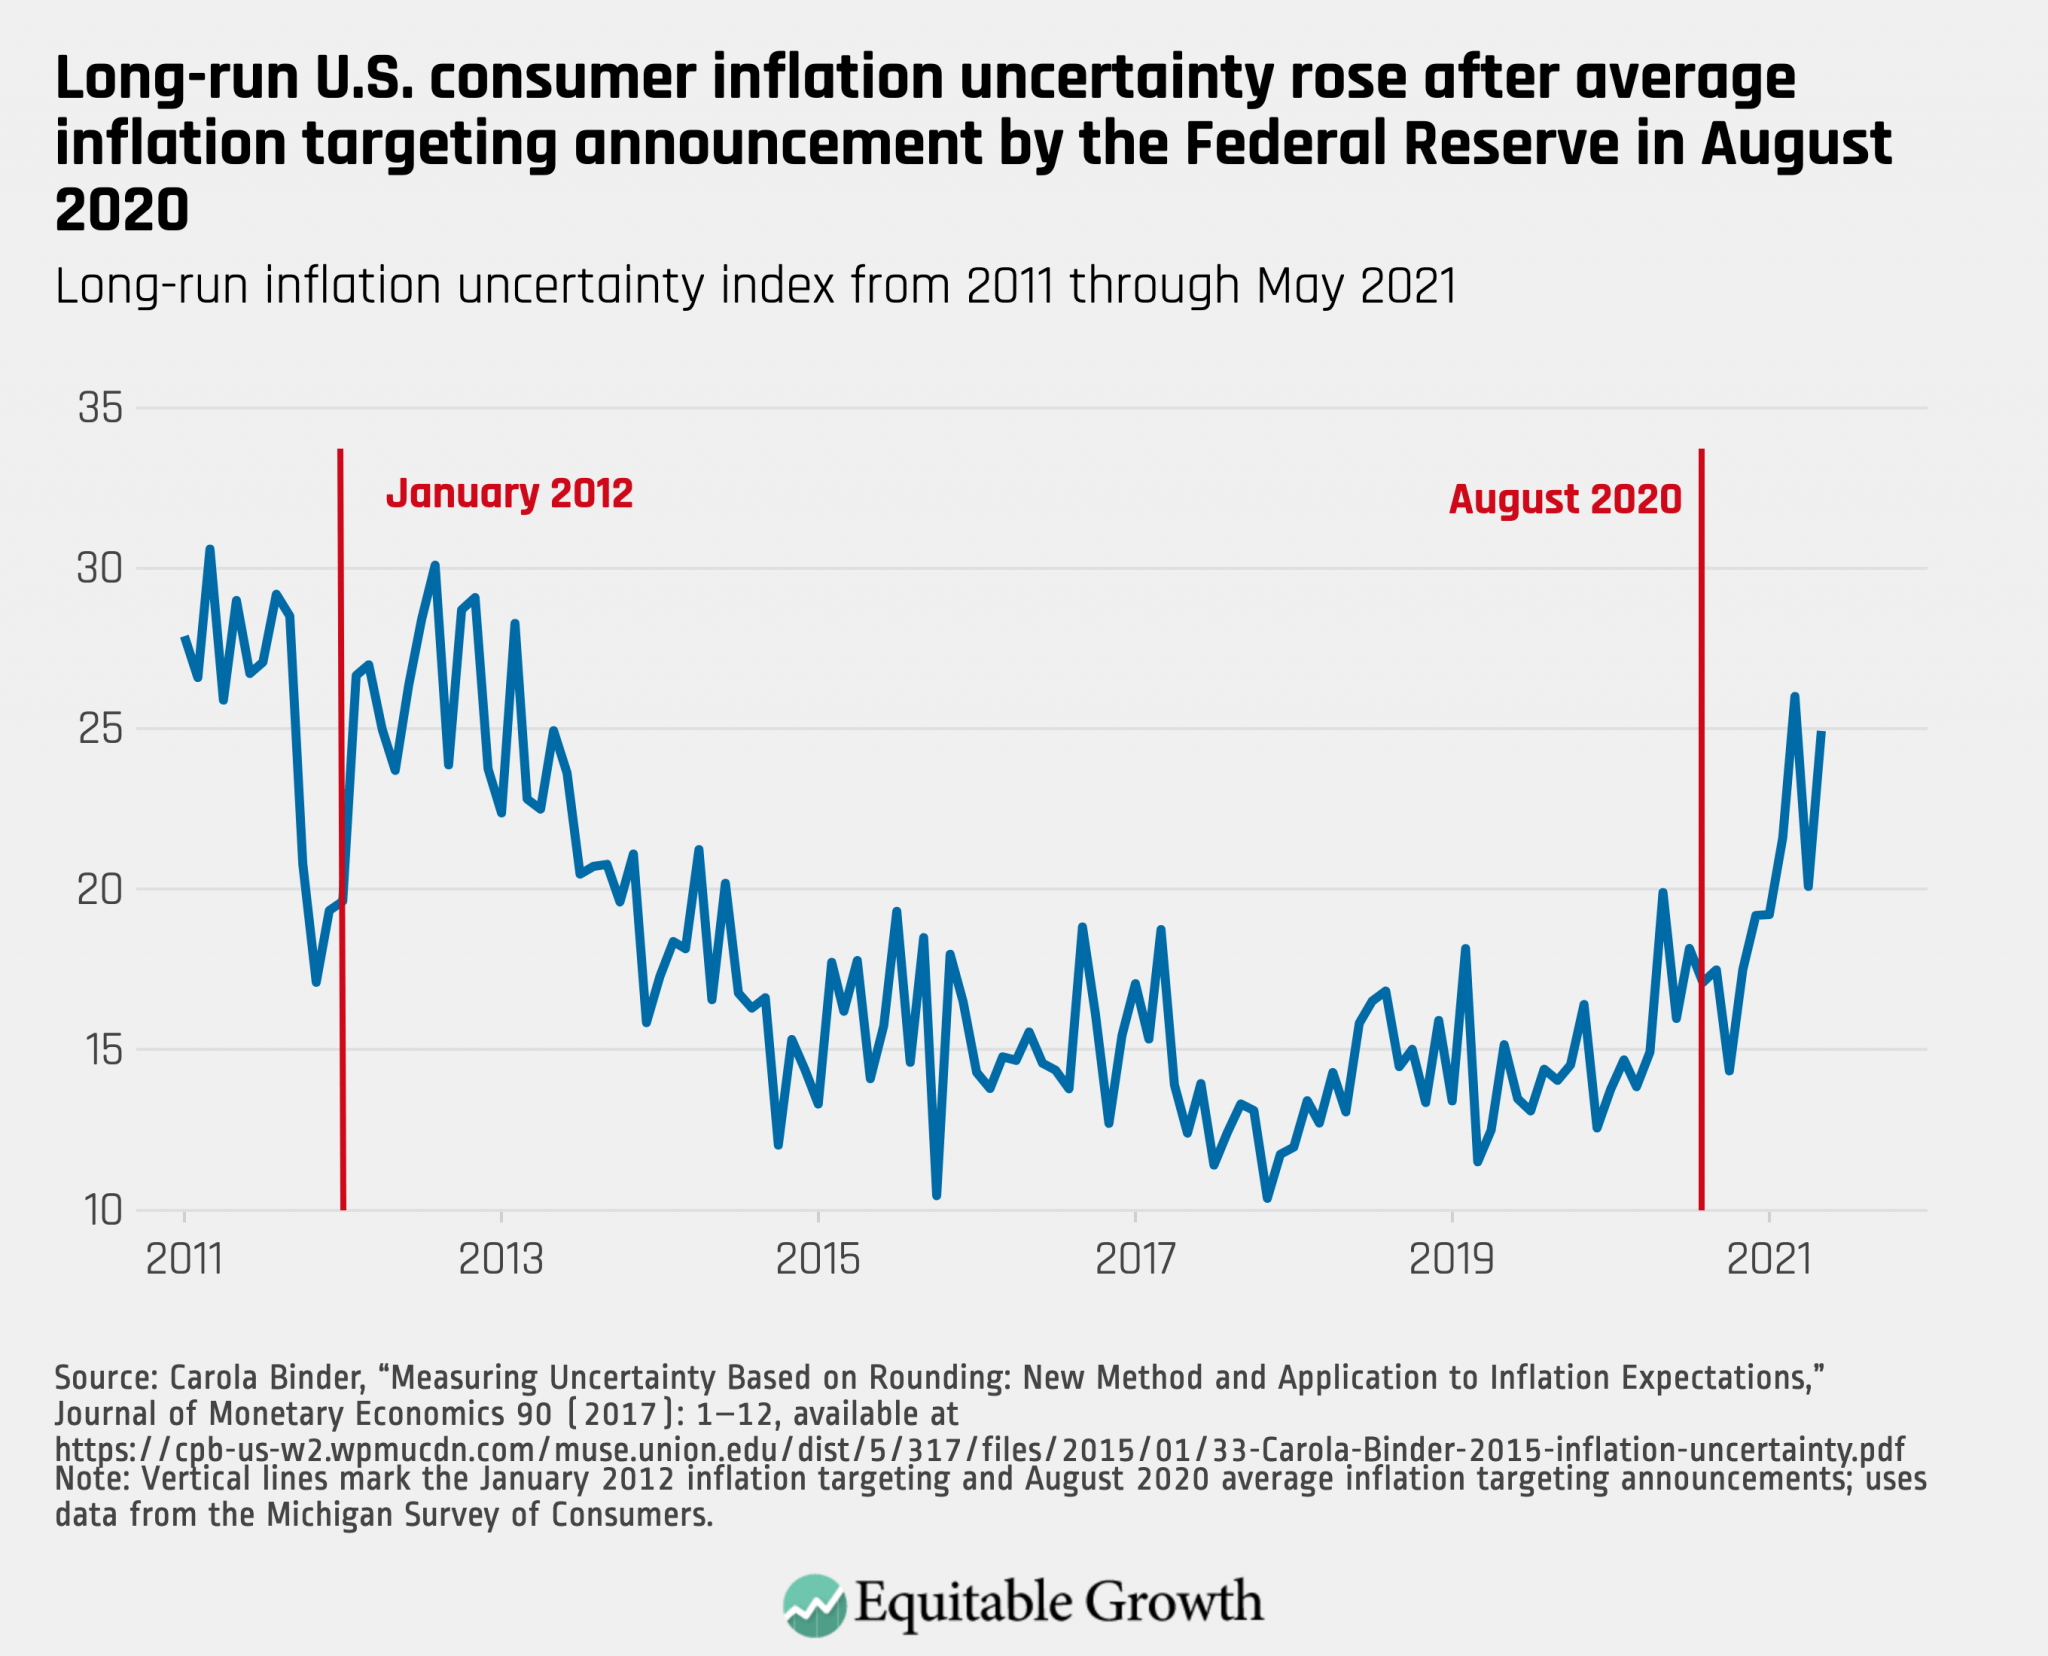 Average inflation targeting by the Federal Reserve and U.S. consumer